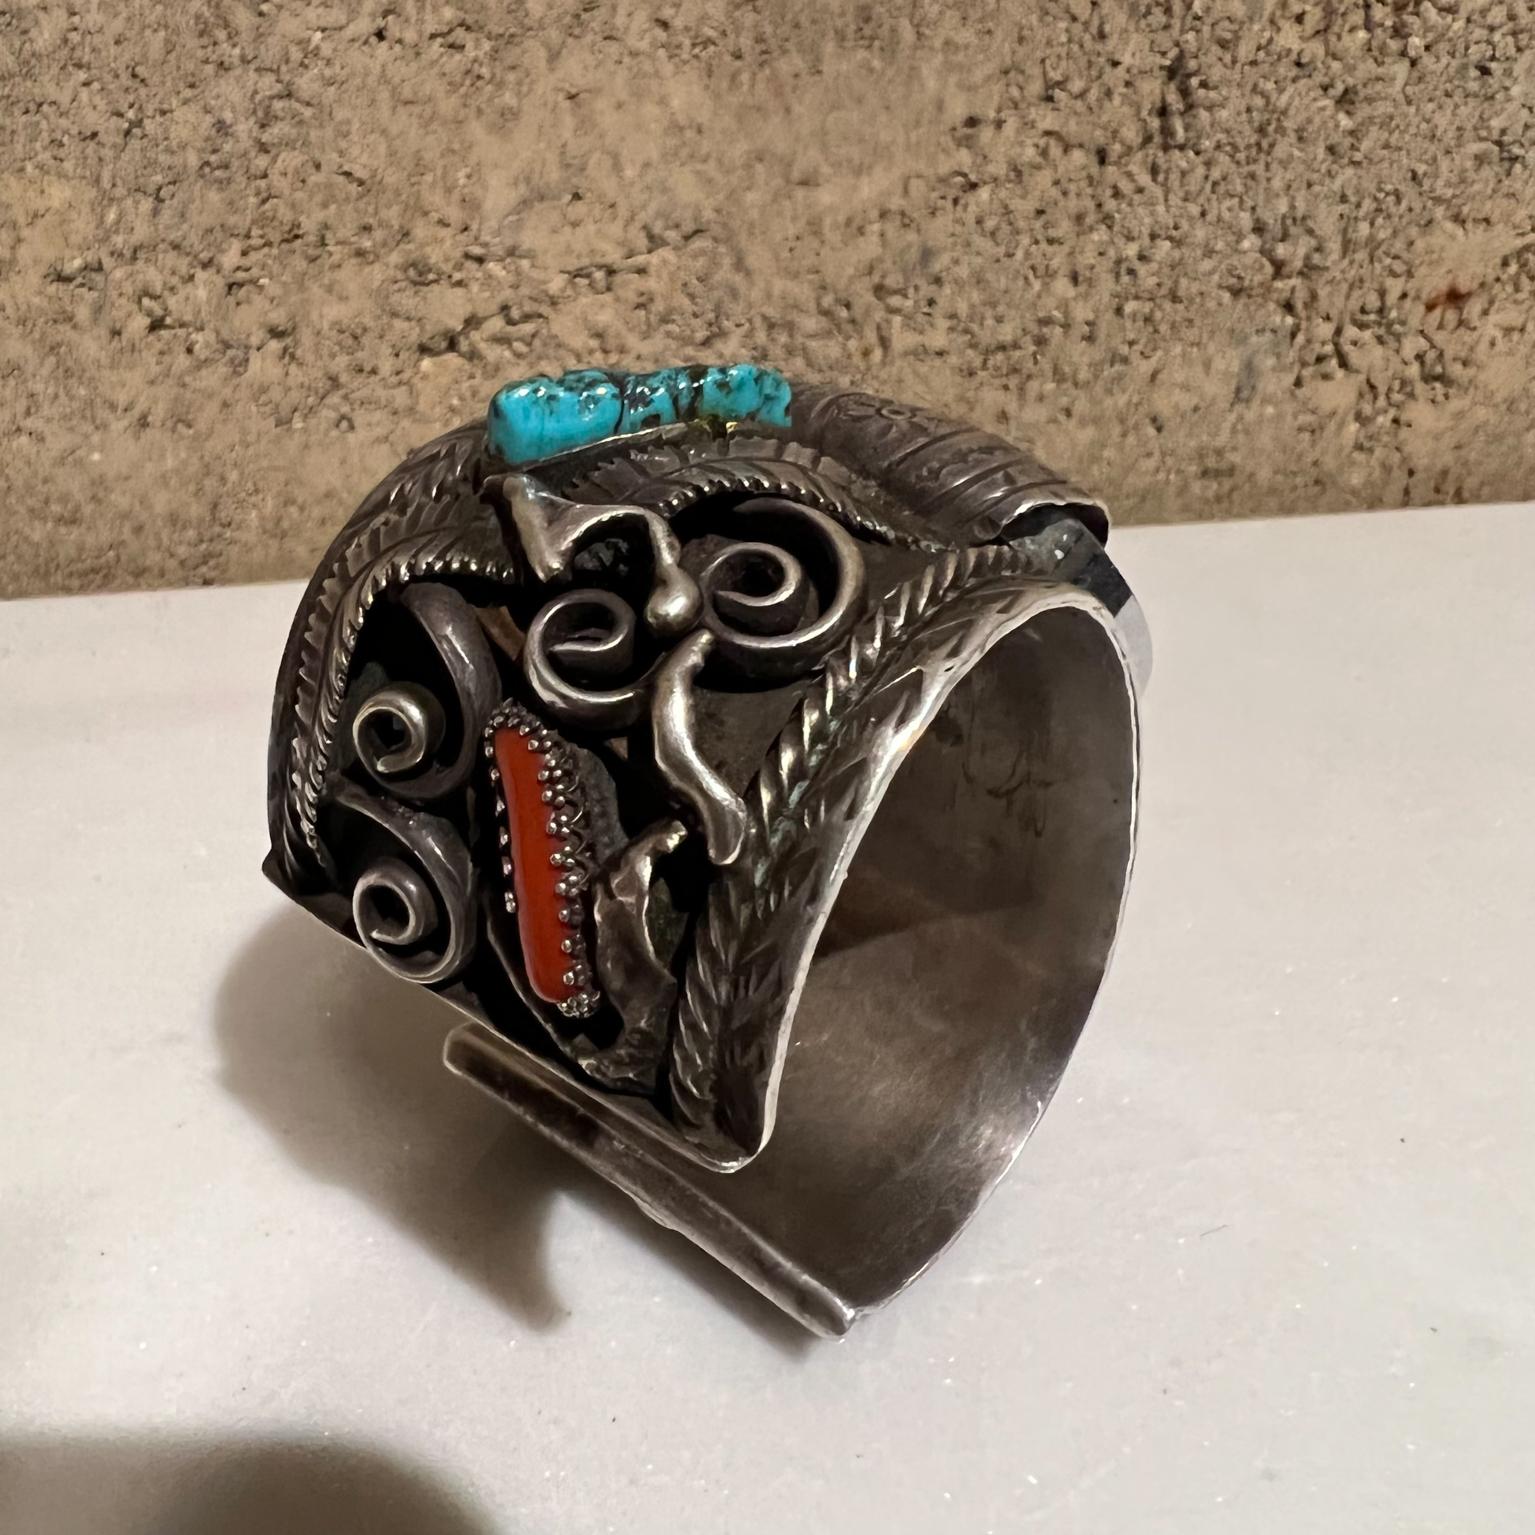 1970s Navajo Southwestern Silver and Stone Decorative Cuff Bracelet Watch Band For Sale 1